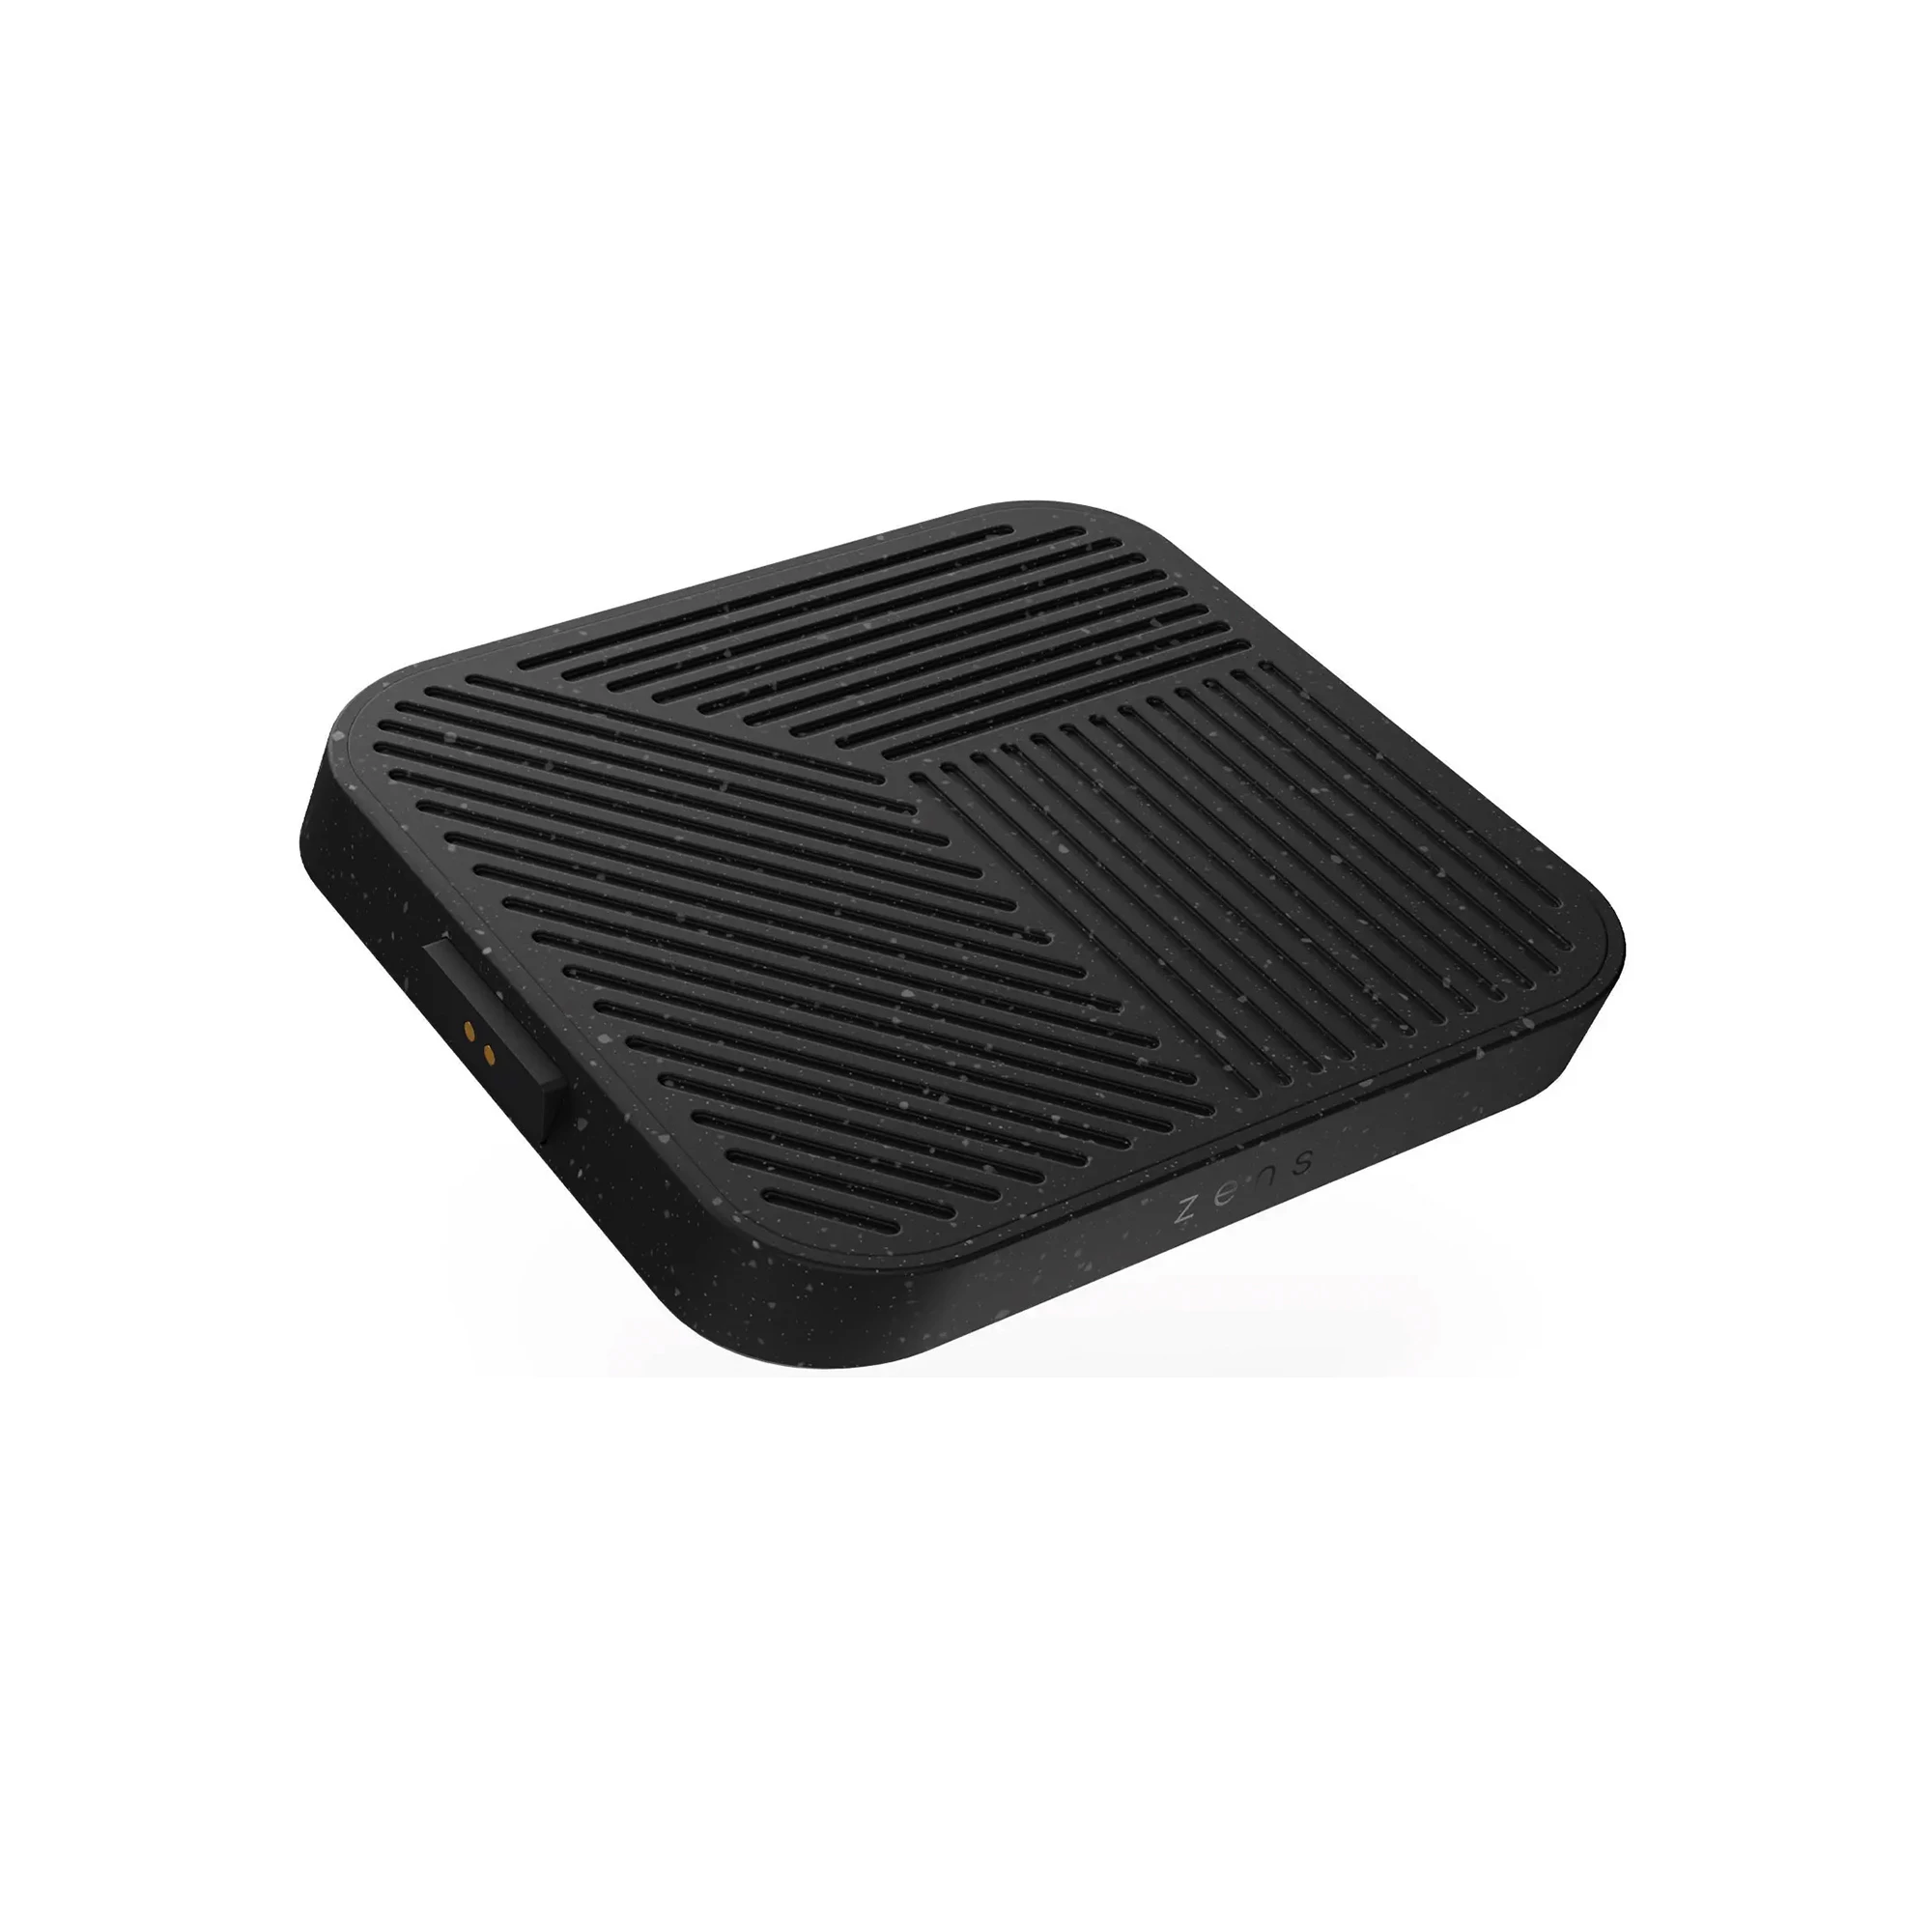 Zens Modular Single Wireless Charger Black with Wall Charger (ZEMSC1P/00)